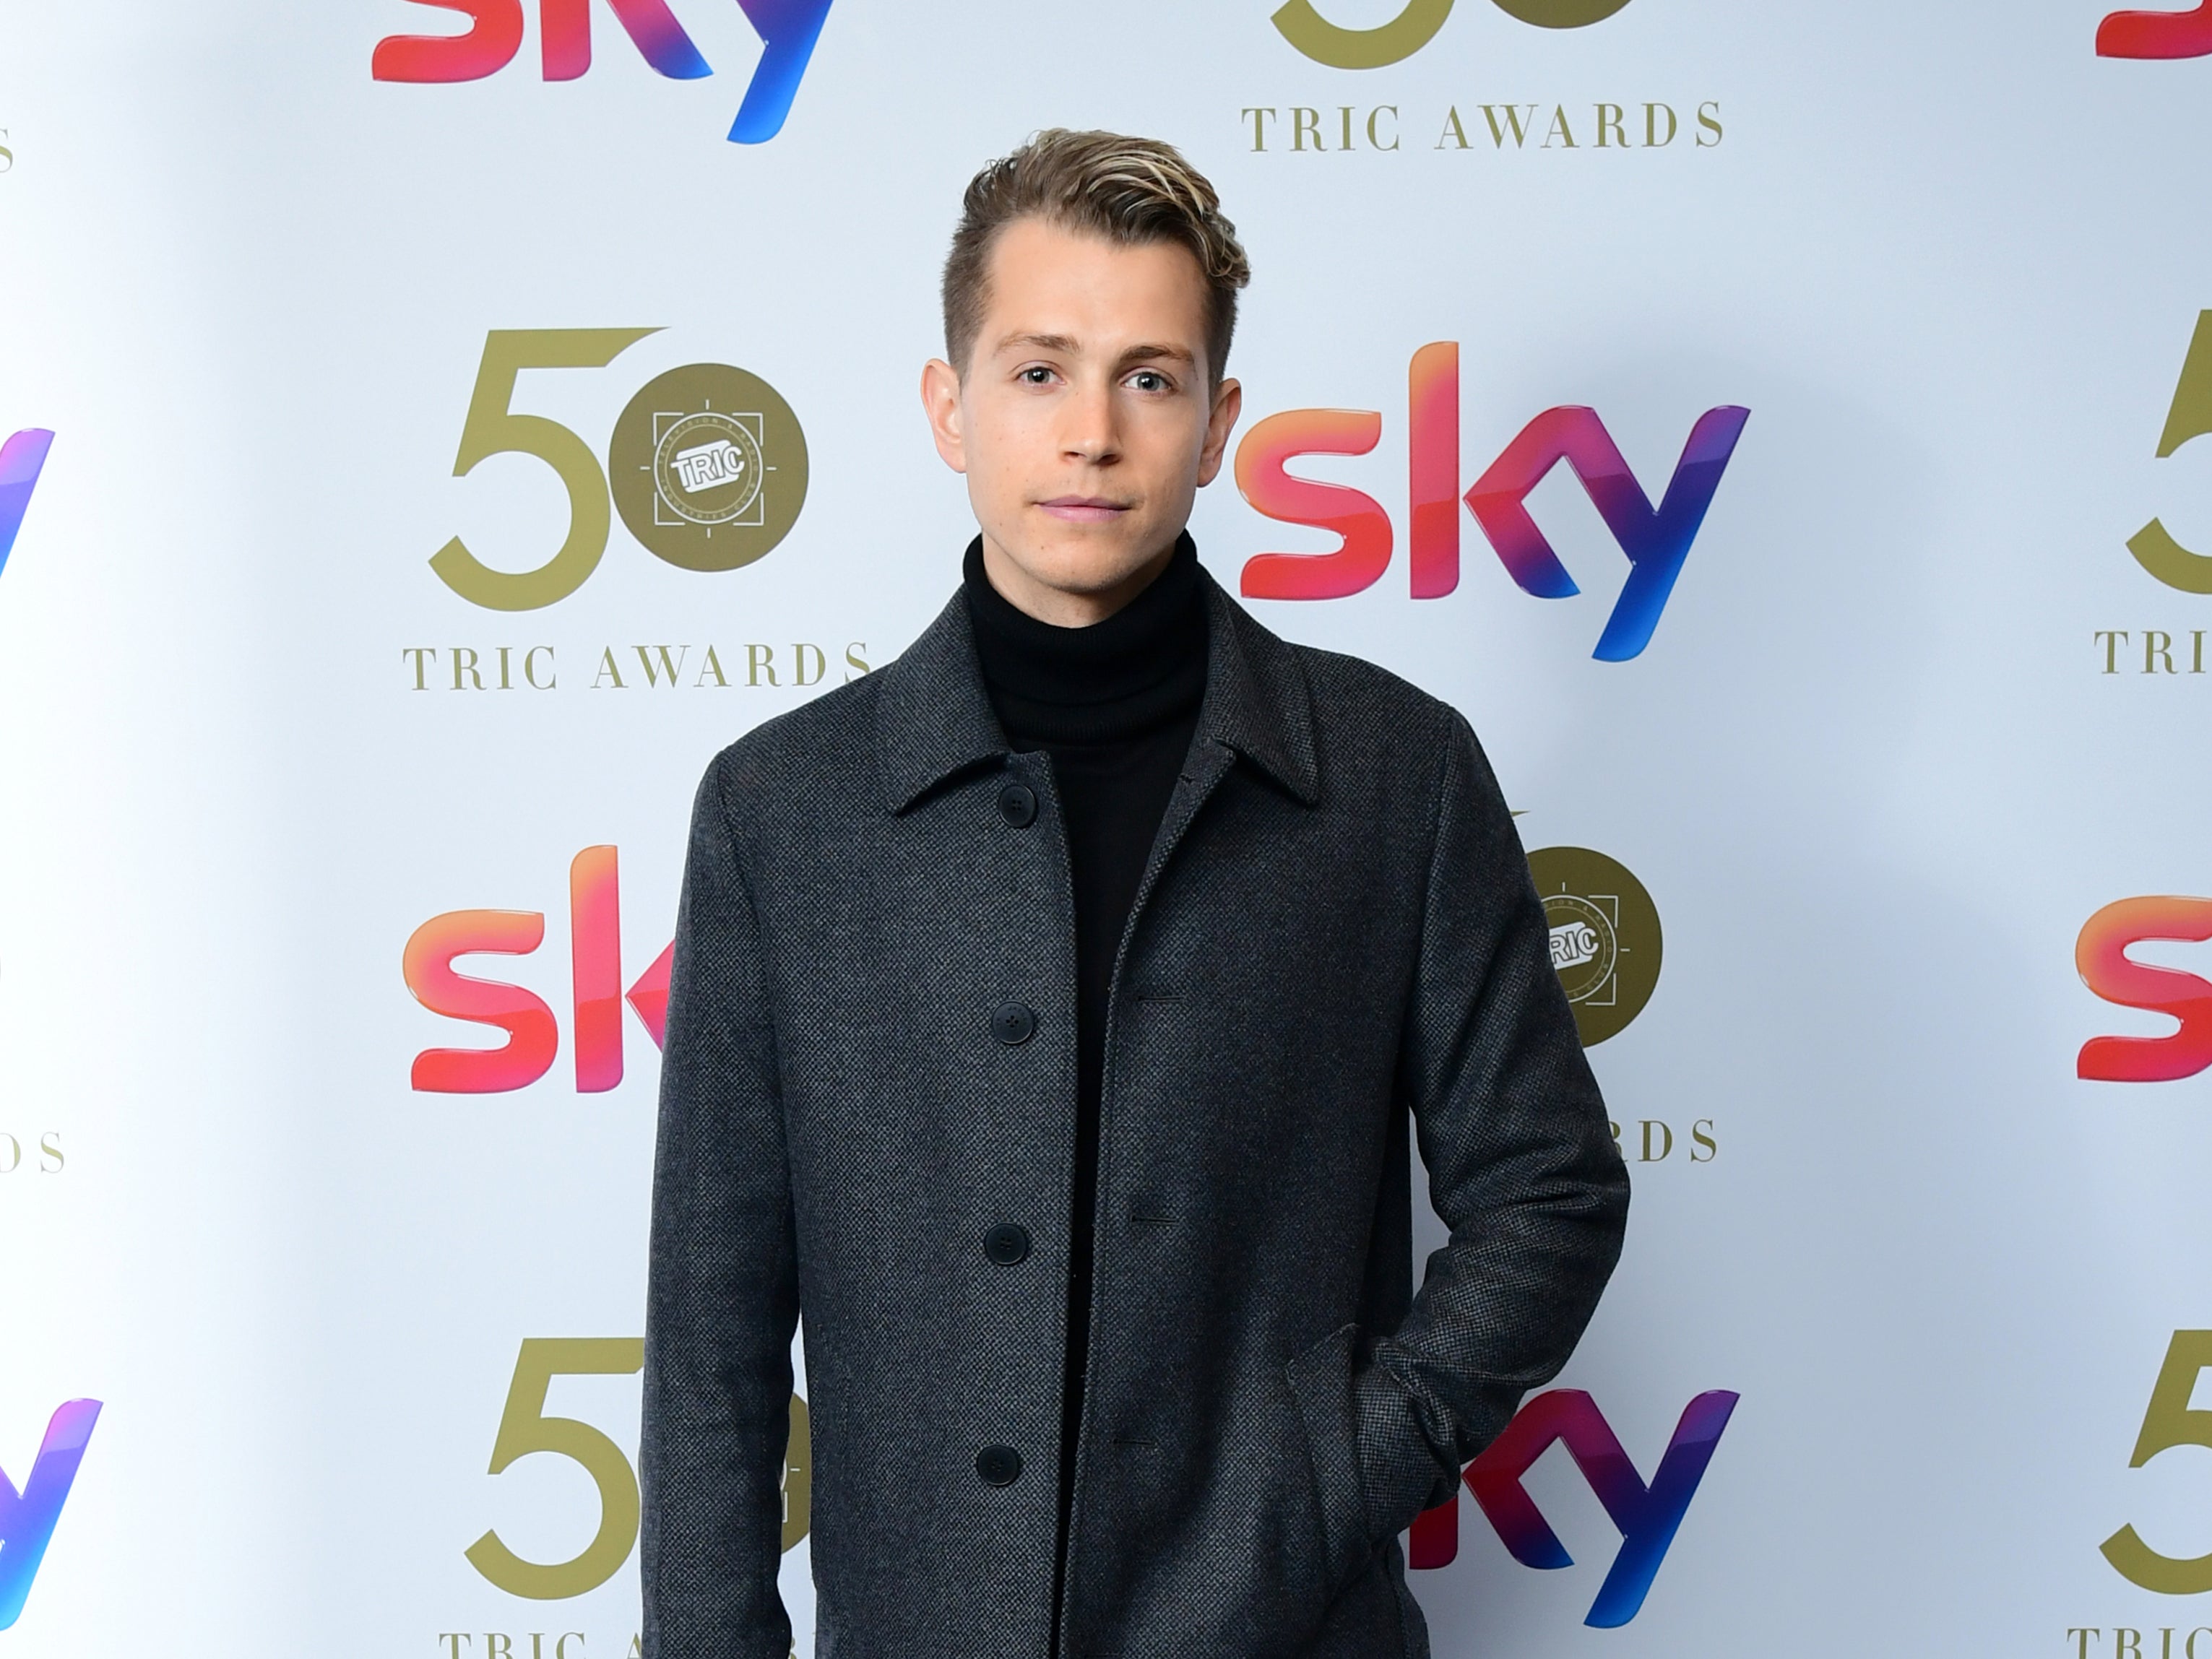 James McVey attending the TRIC Awards 2019 50th Birthday Celebration held at the Grosvenor House Hotel, London